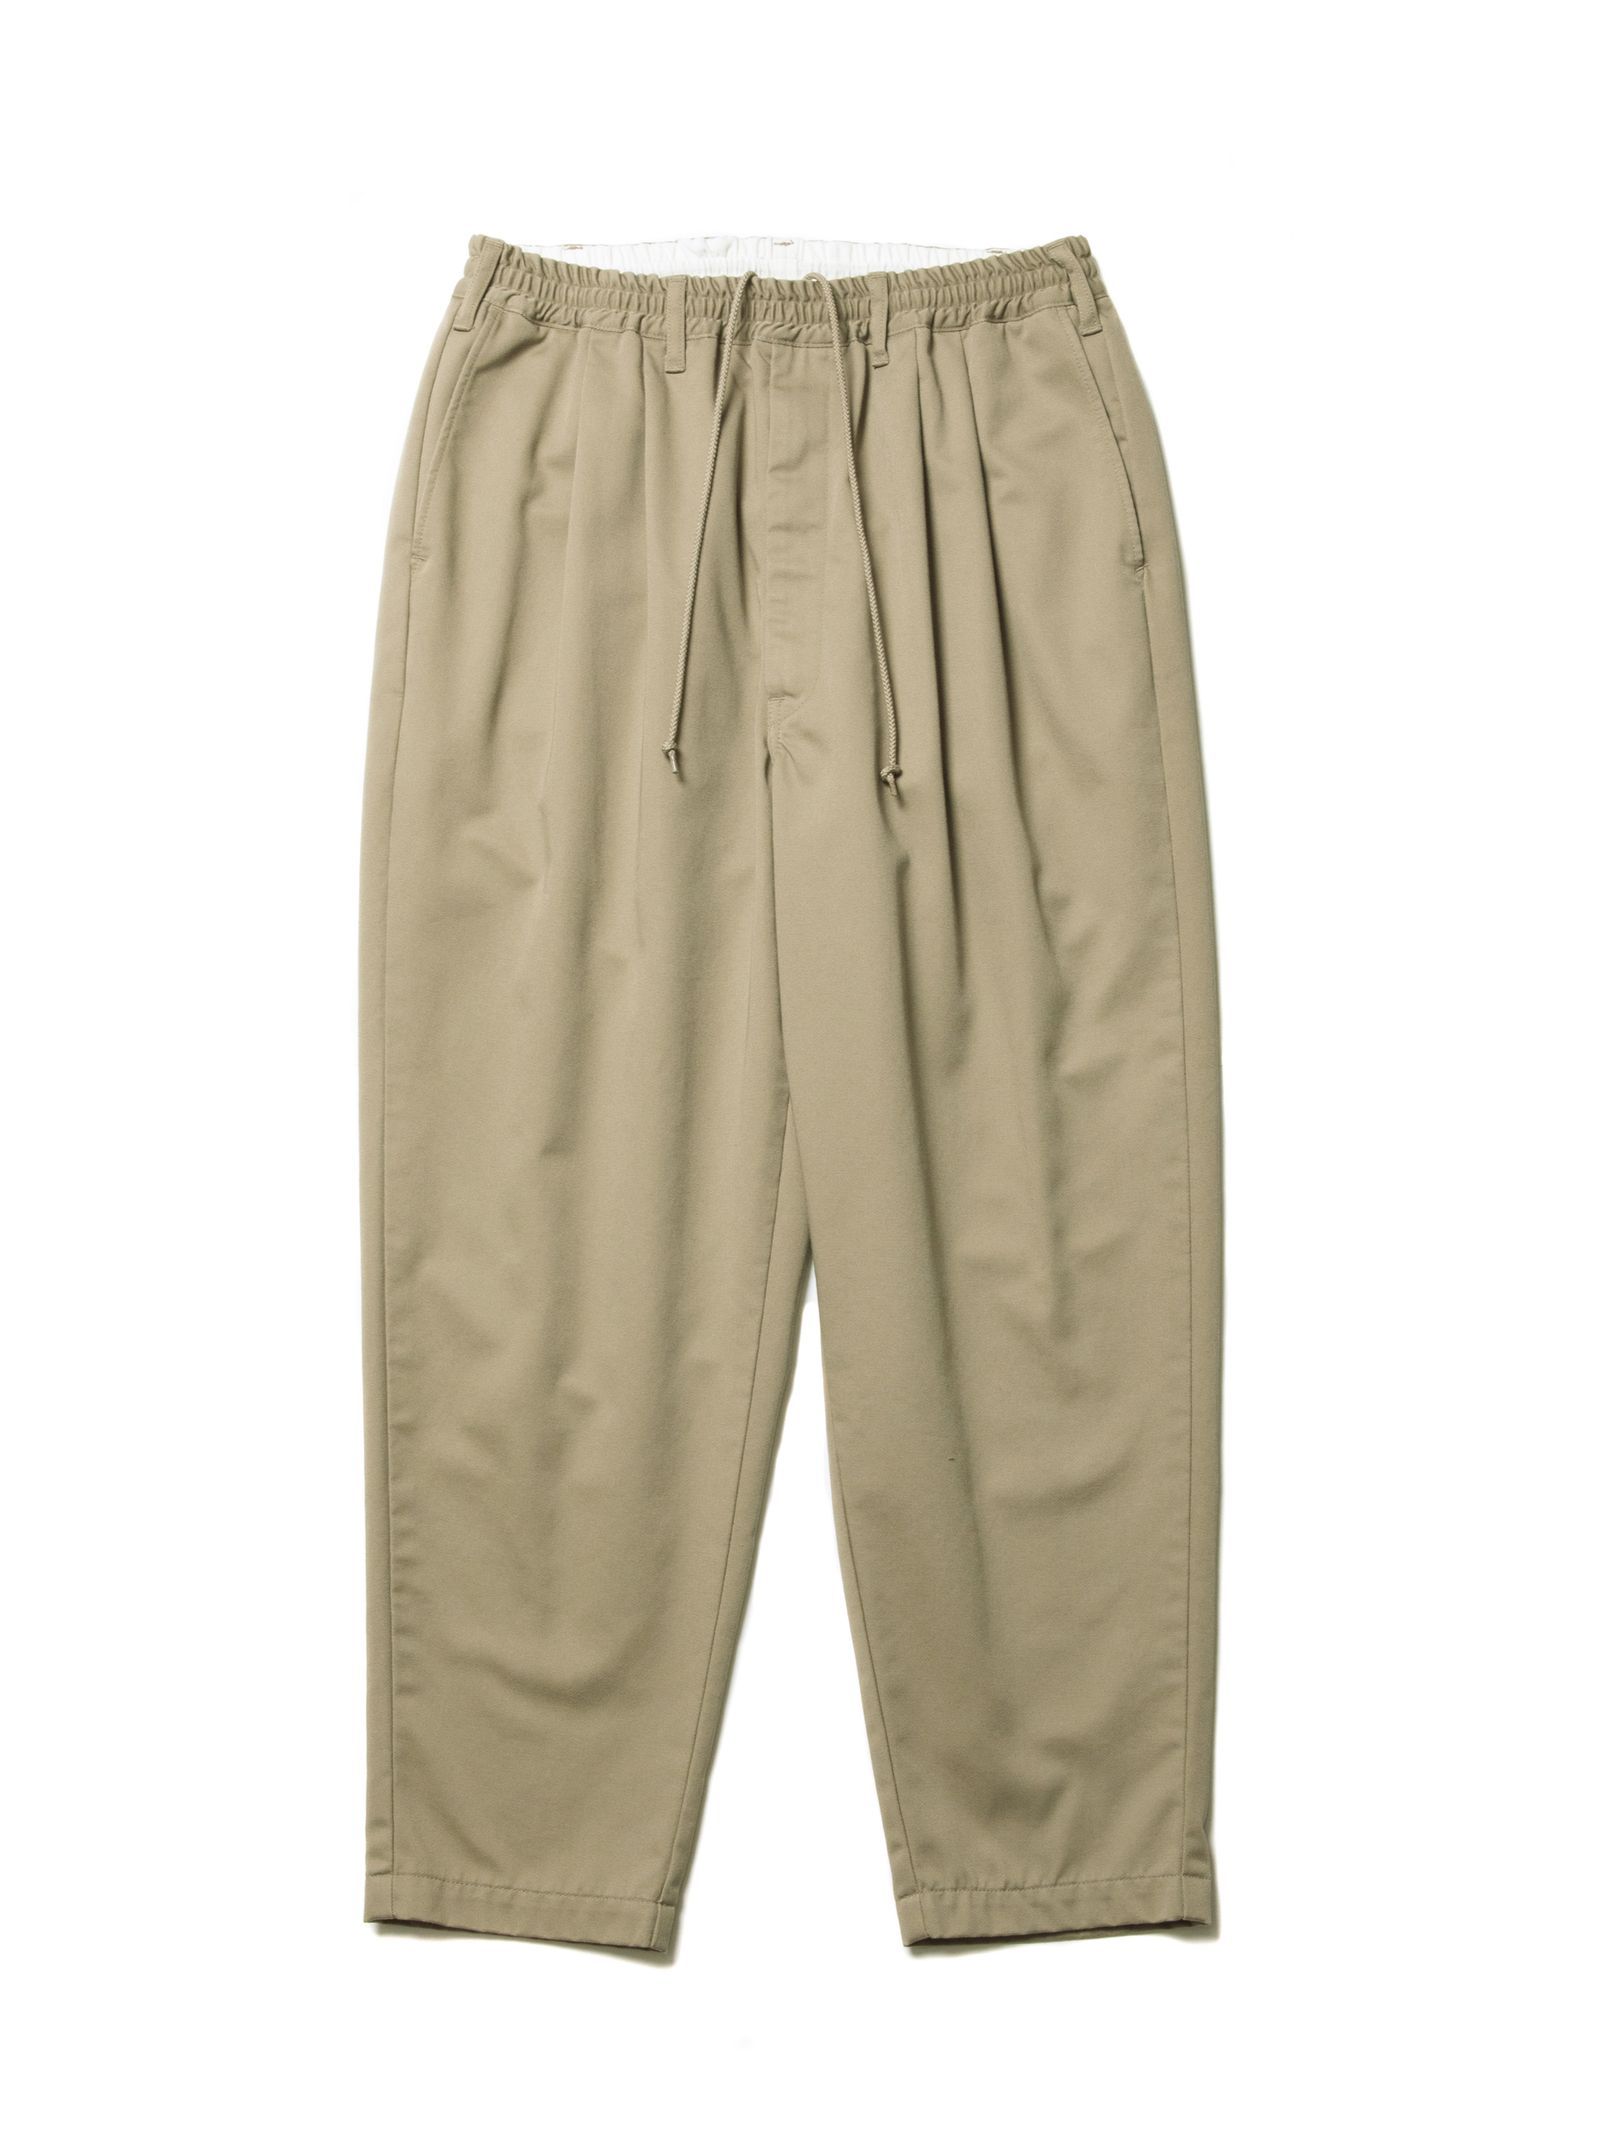 COOTIE PRODUCTIONS - 【ラスト1点】T/C 2 Tuck Easy Ankle Pants 